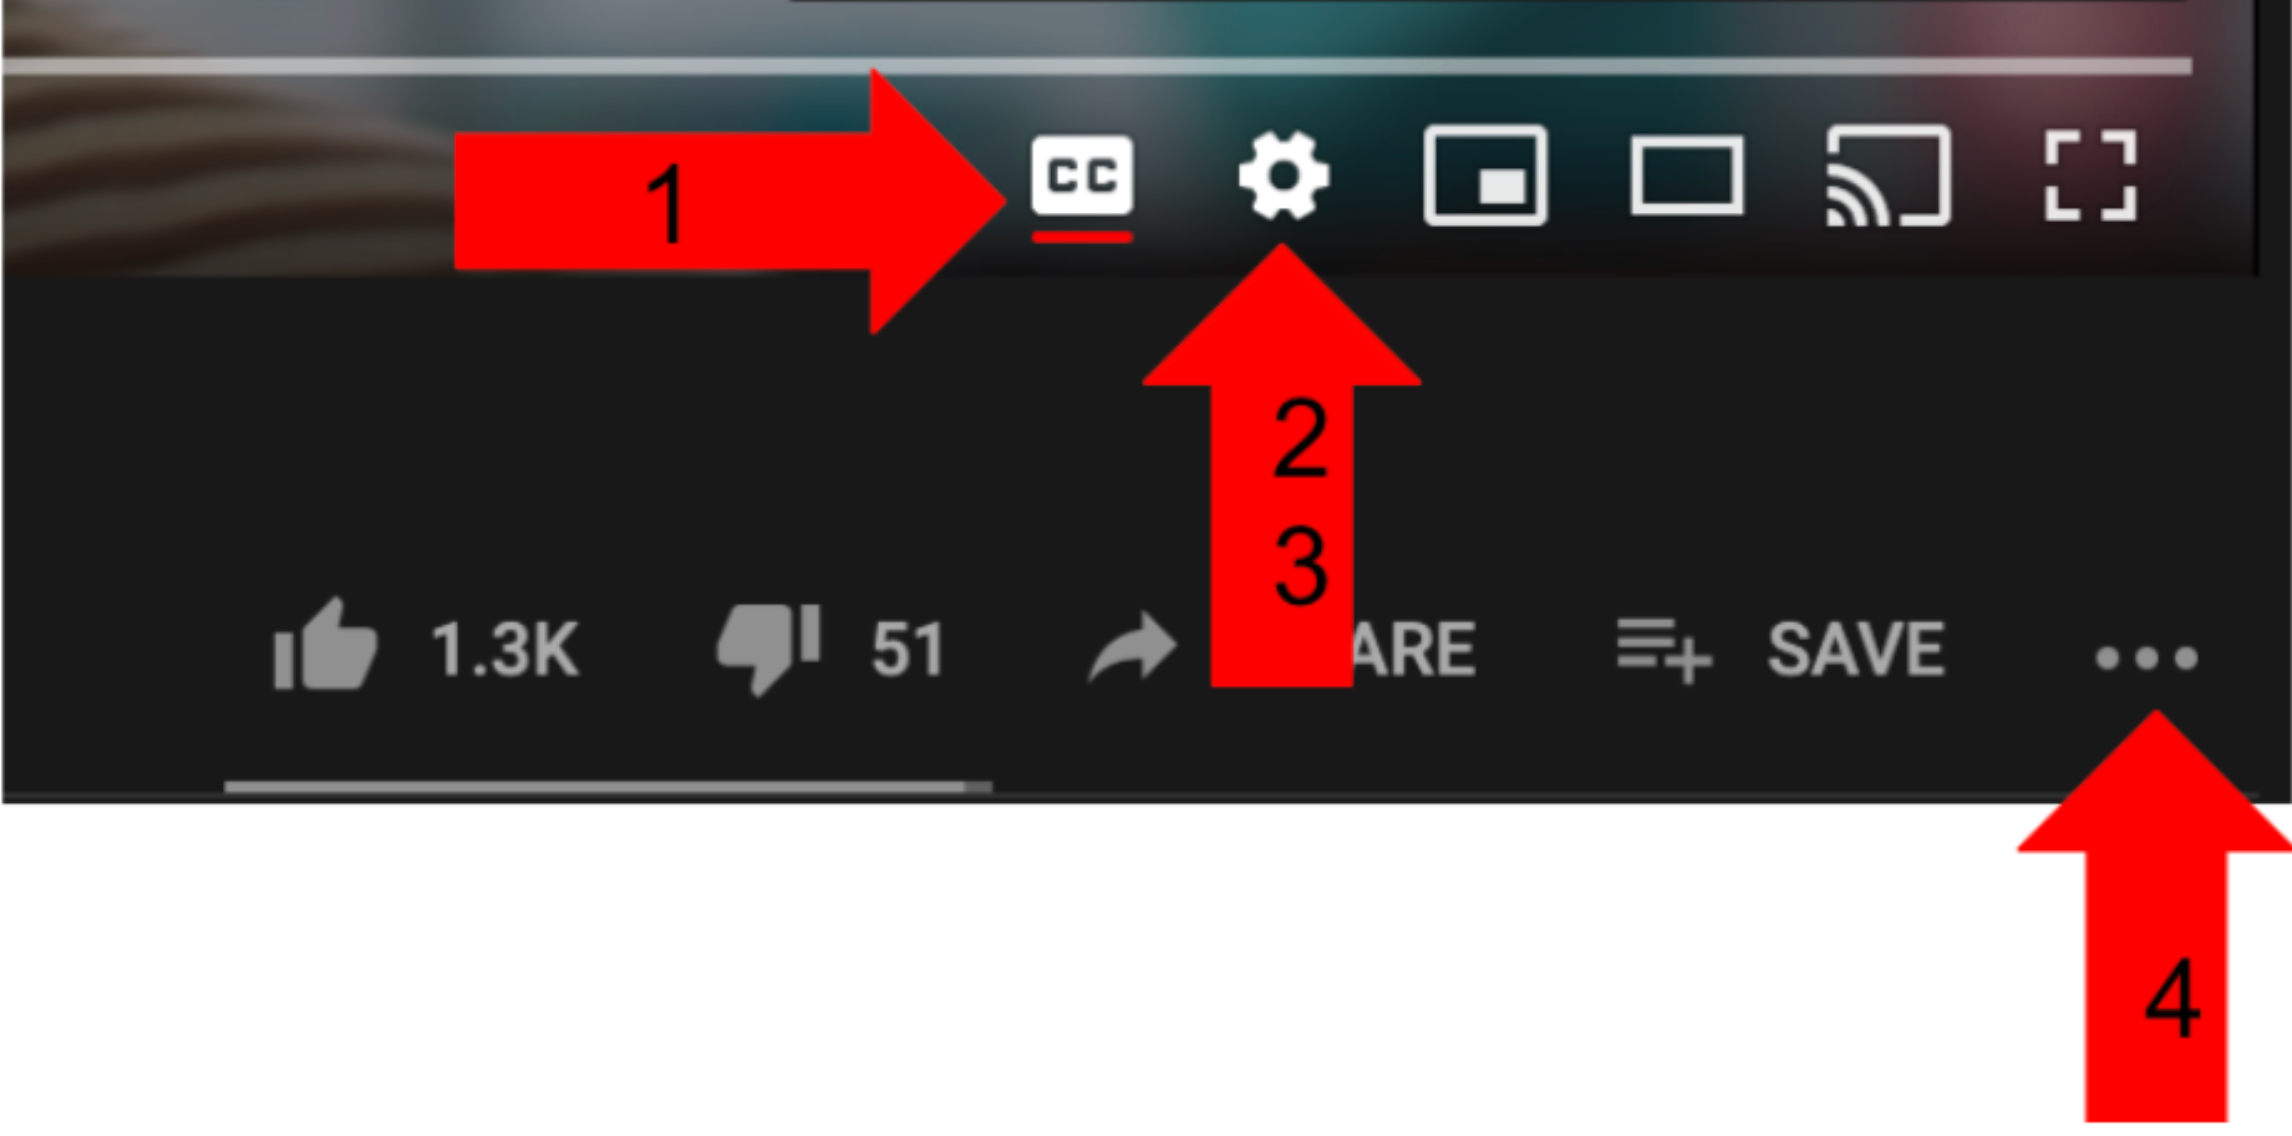 YouTube is helpful for working with ELs